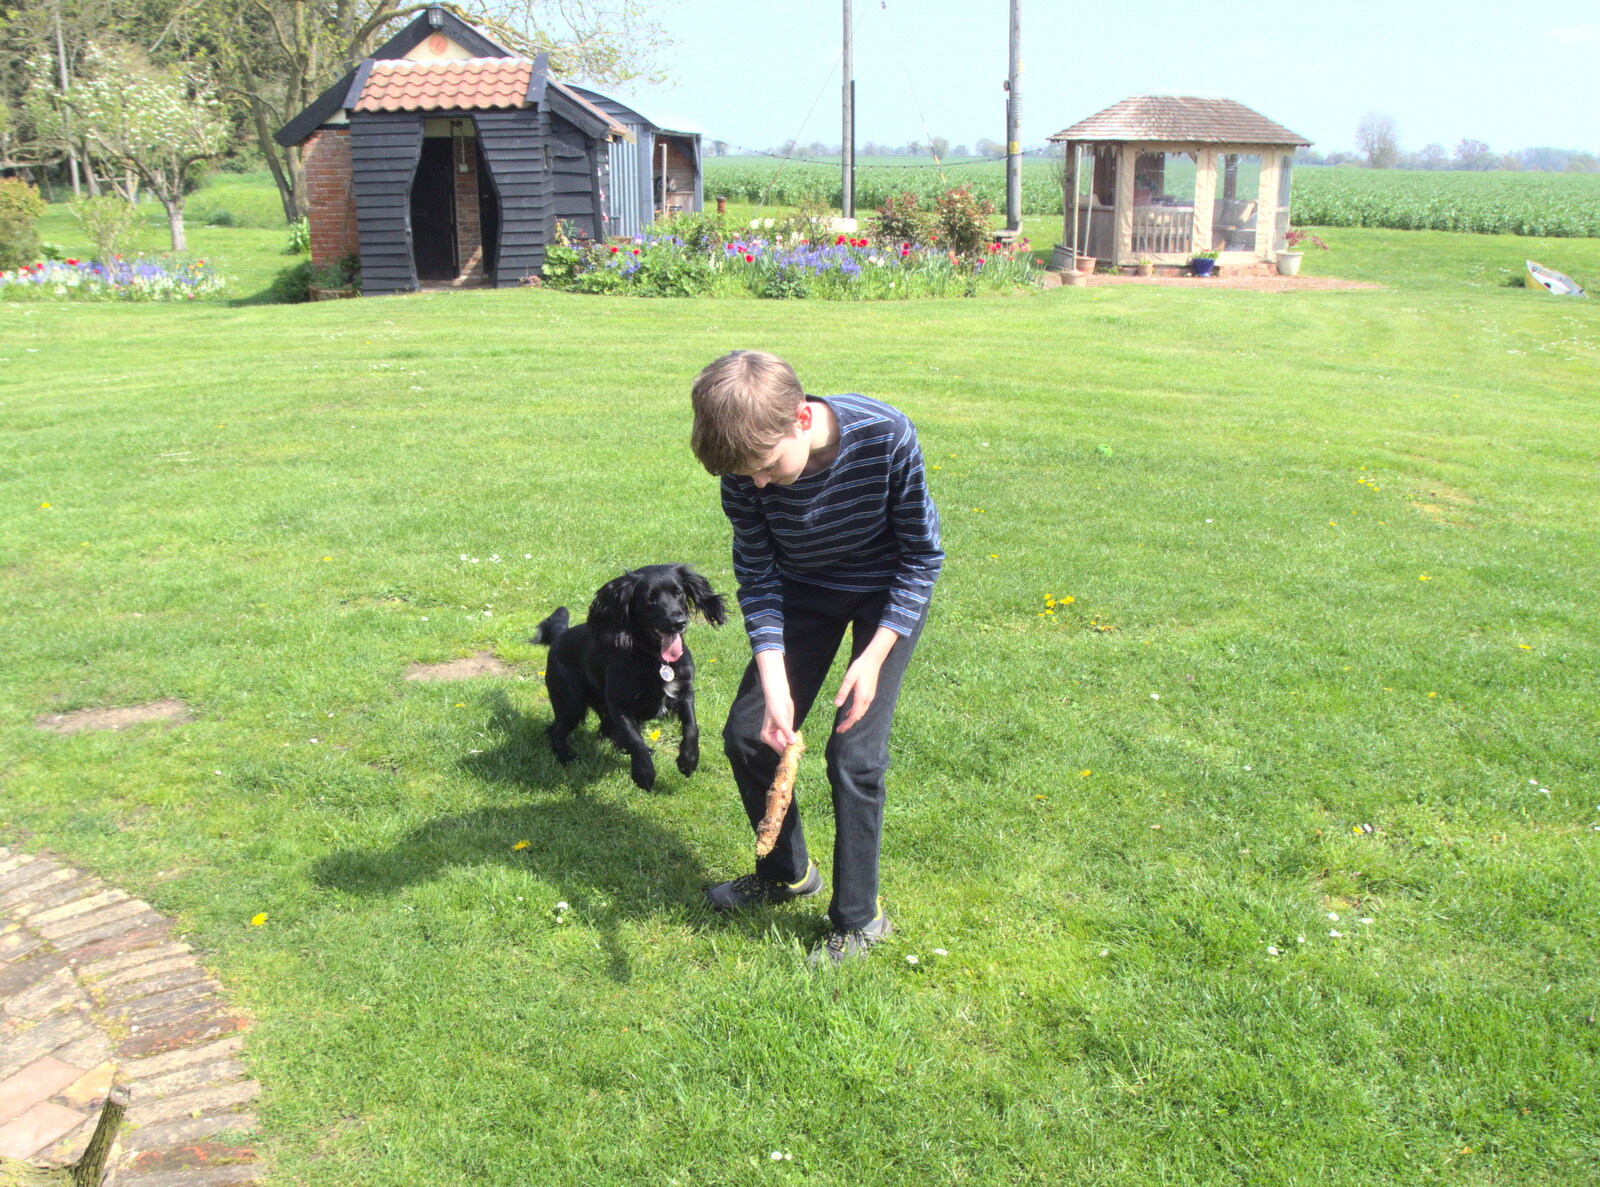 Over at Chickens', Harry plays with Pepper the dog from Pizza at the Village Hall, Brome, Suffolk - 30th April 2023